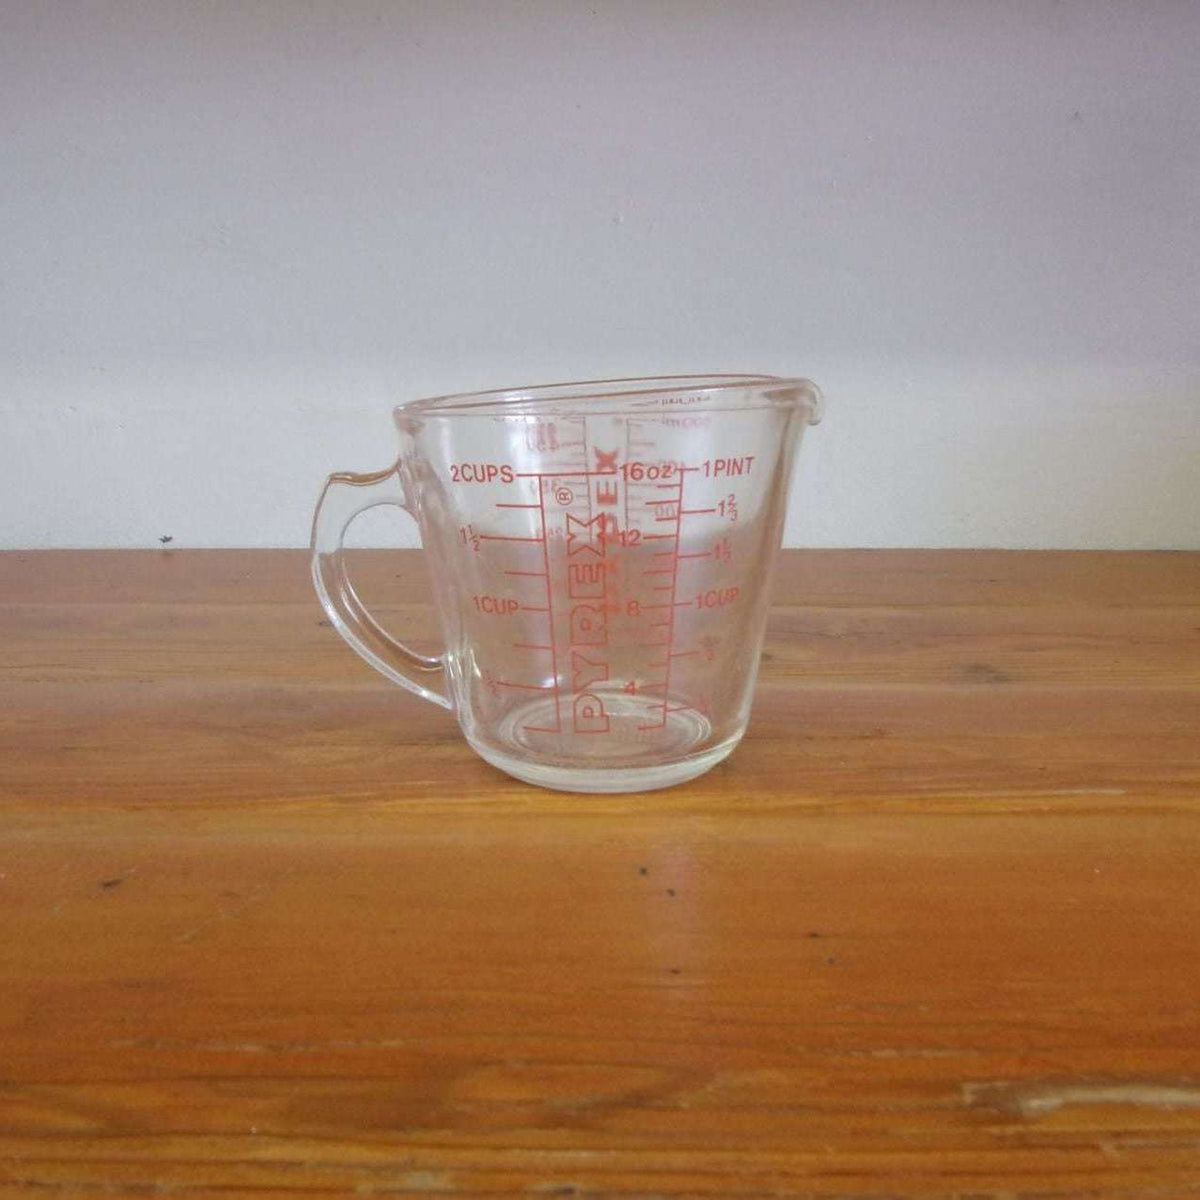 VTG. PYREX - 2 CUP 1 PT 16 OZ 500 ML - GLASS MEASURING CUP RED LETTERS #516  - Lil Dusty Online Auctions - All Estate Services, LLC